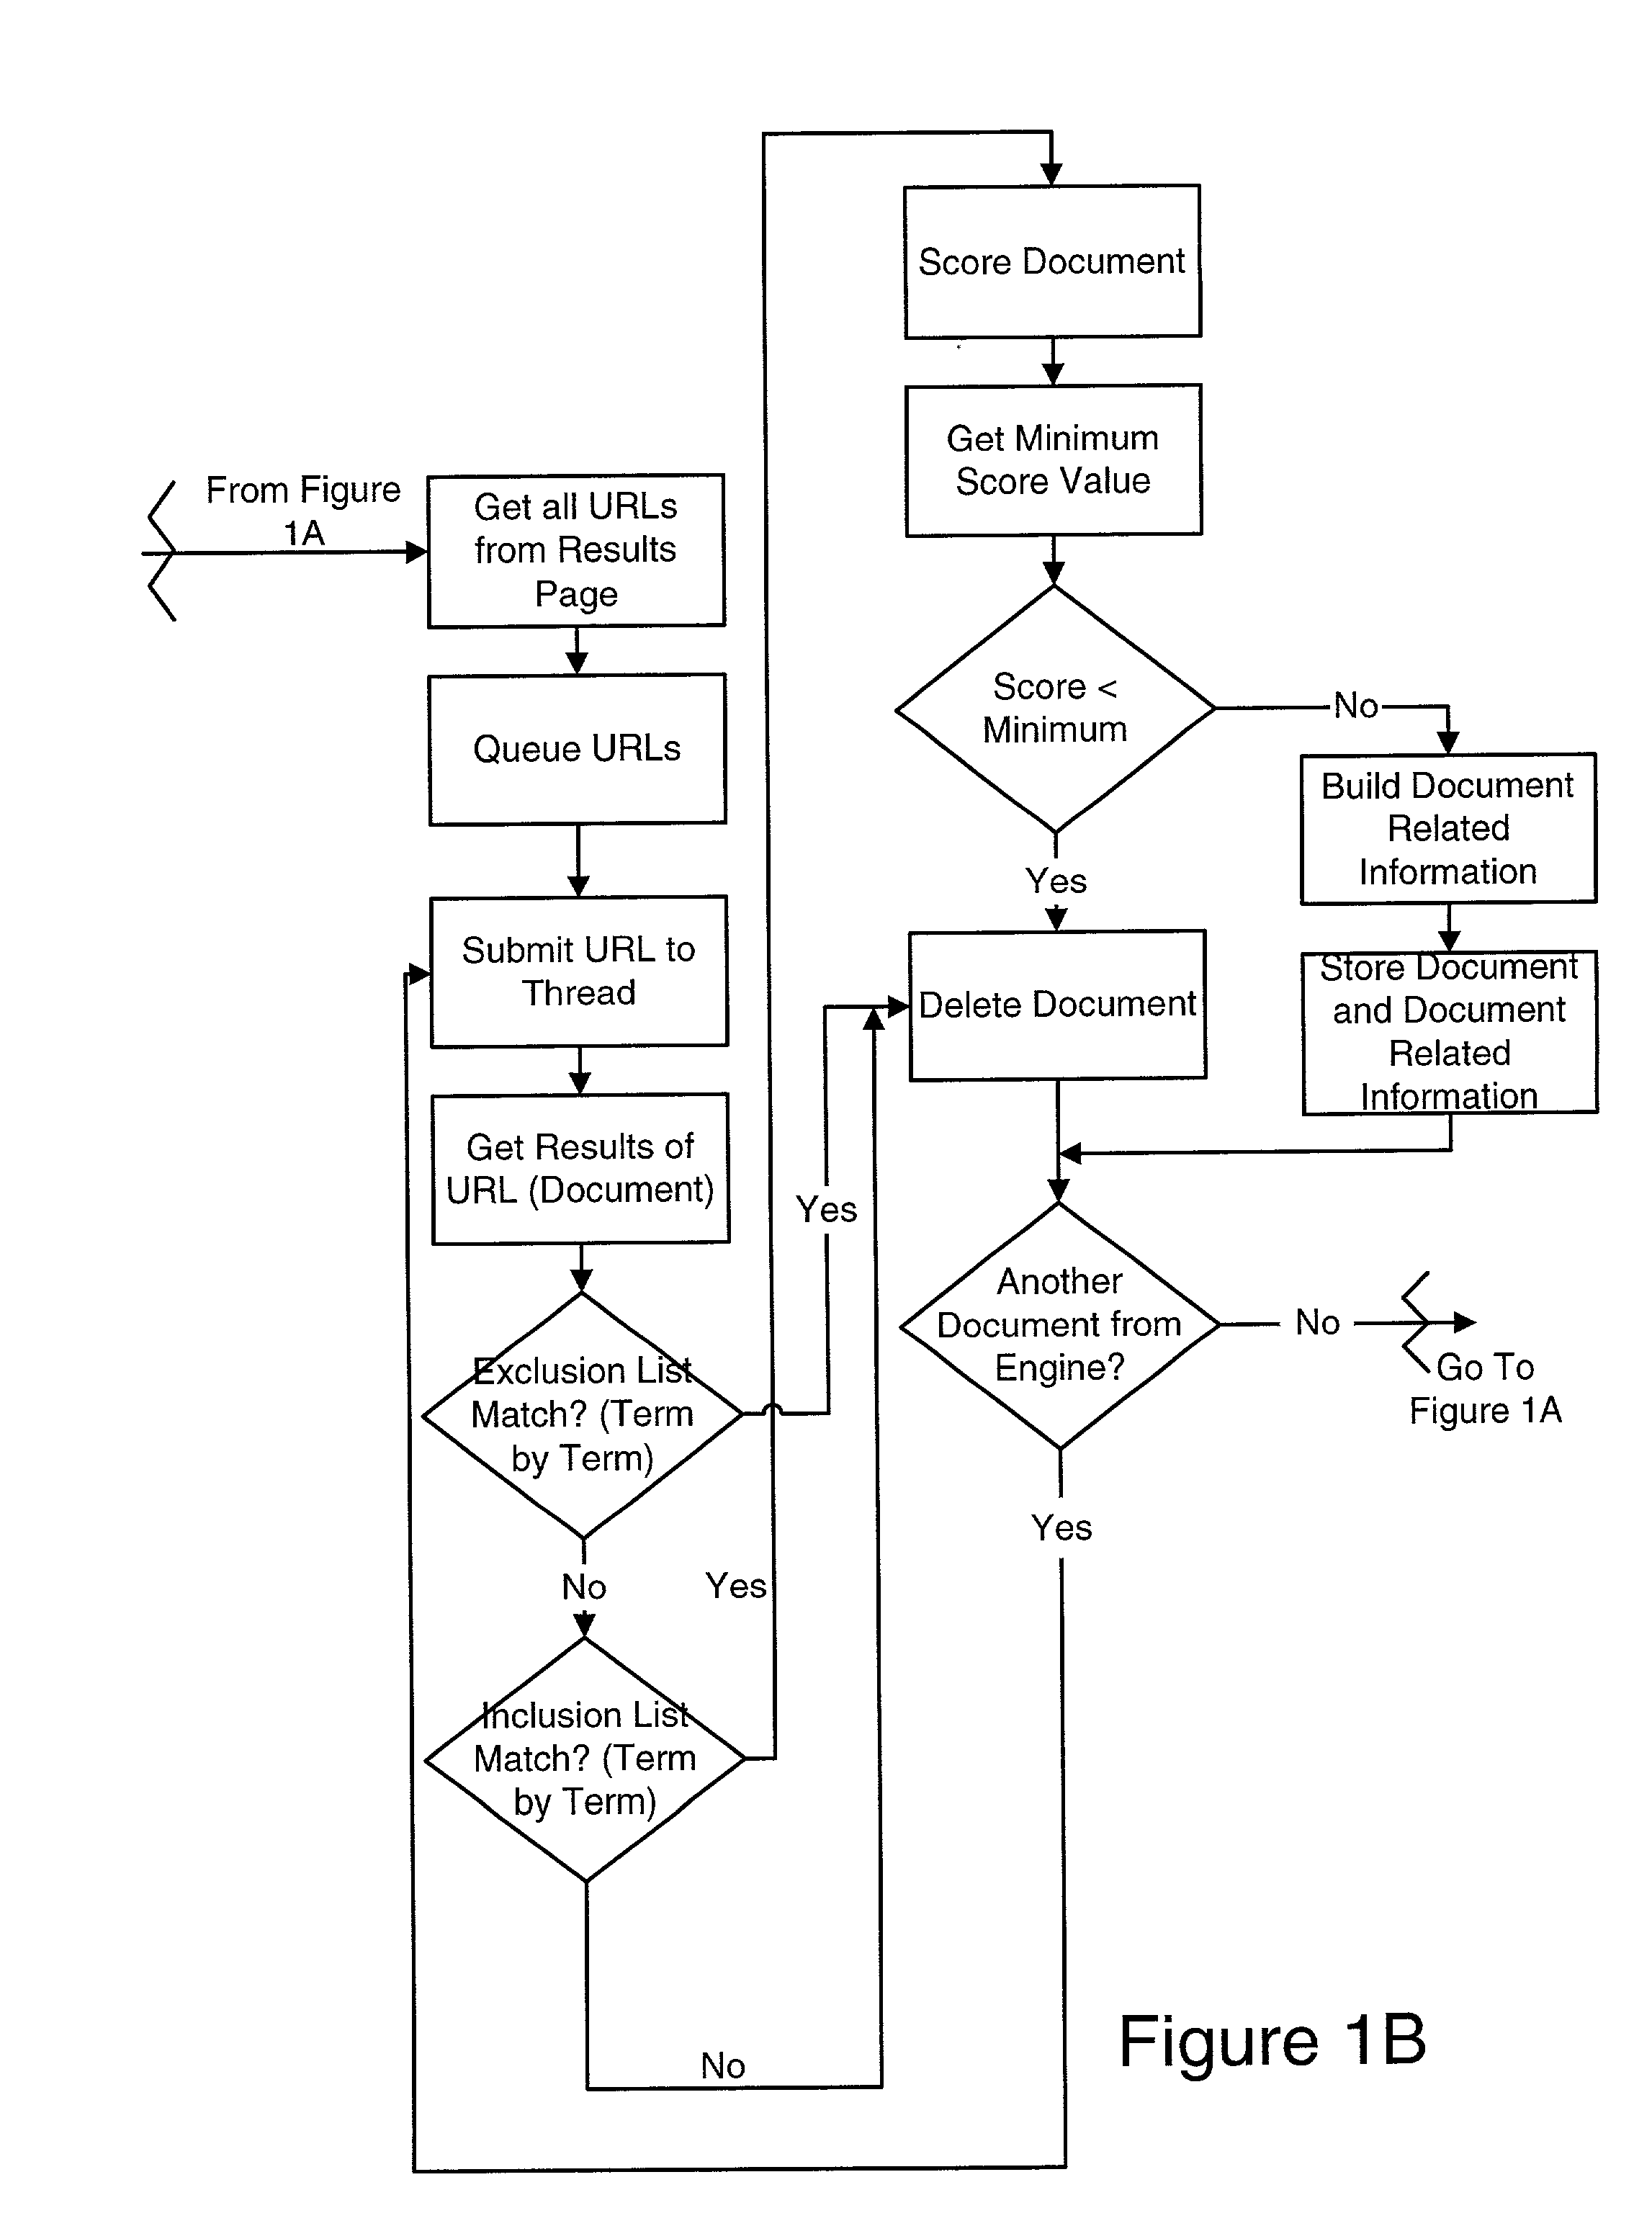 System and method for efficient control and capture of dynamic database content